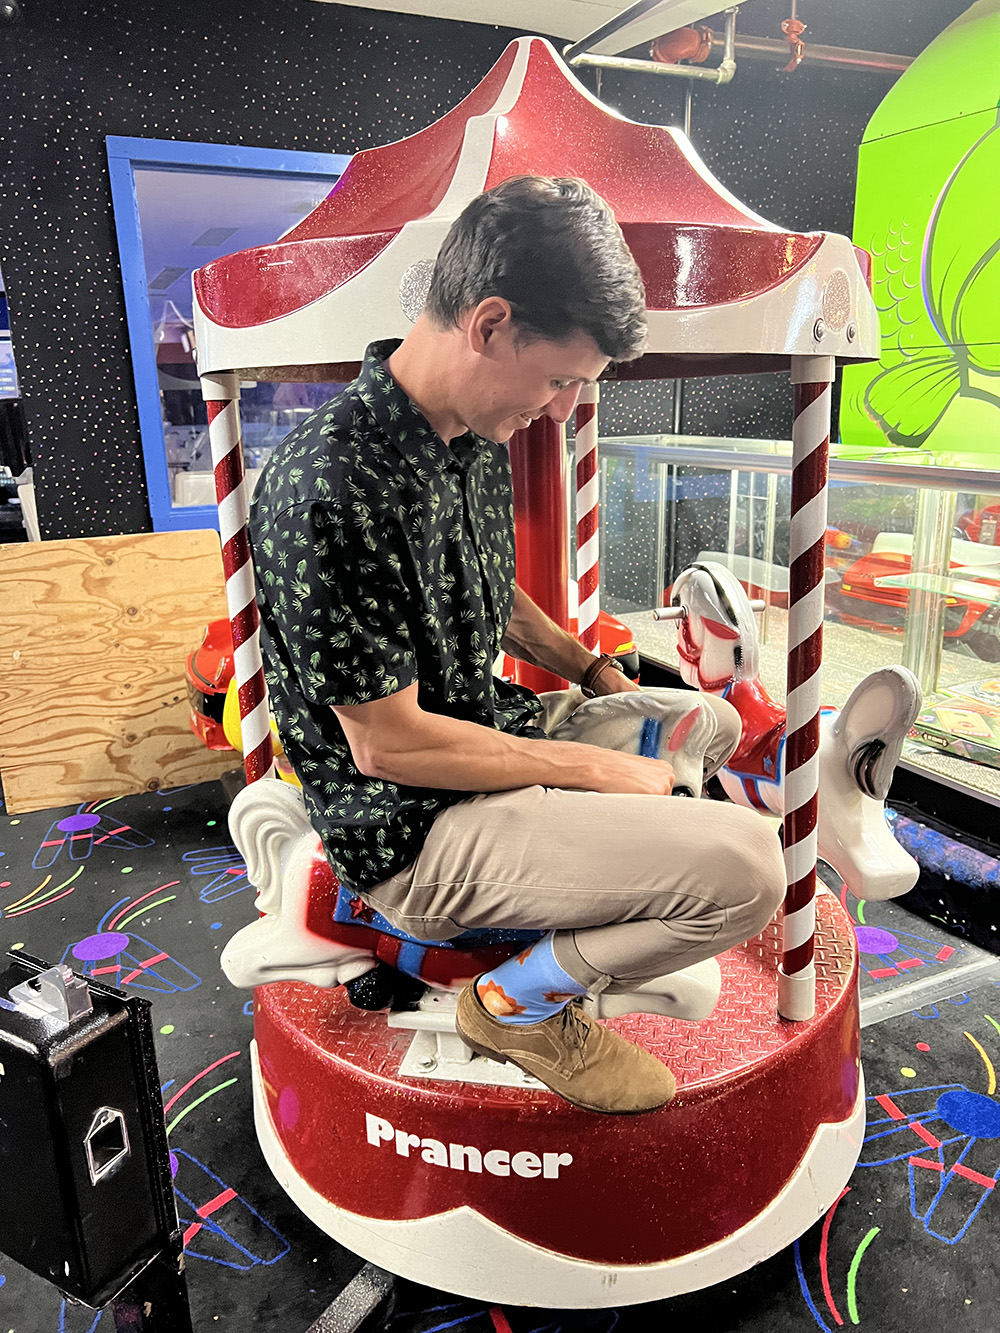 Sitting on a small arcade ride